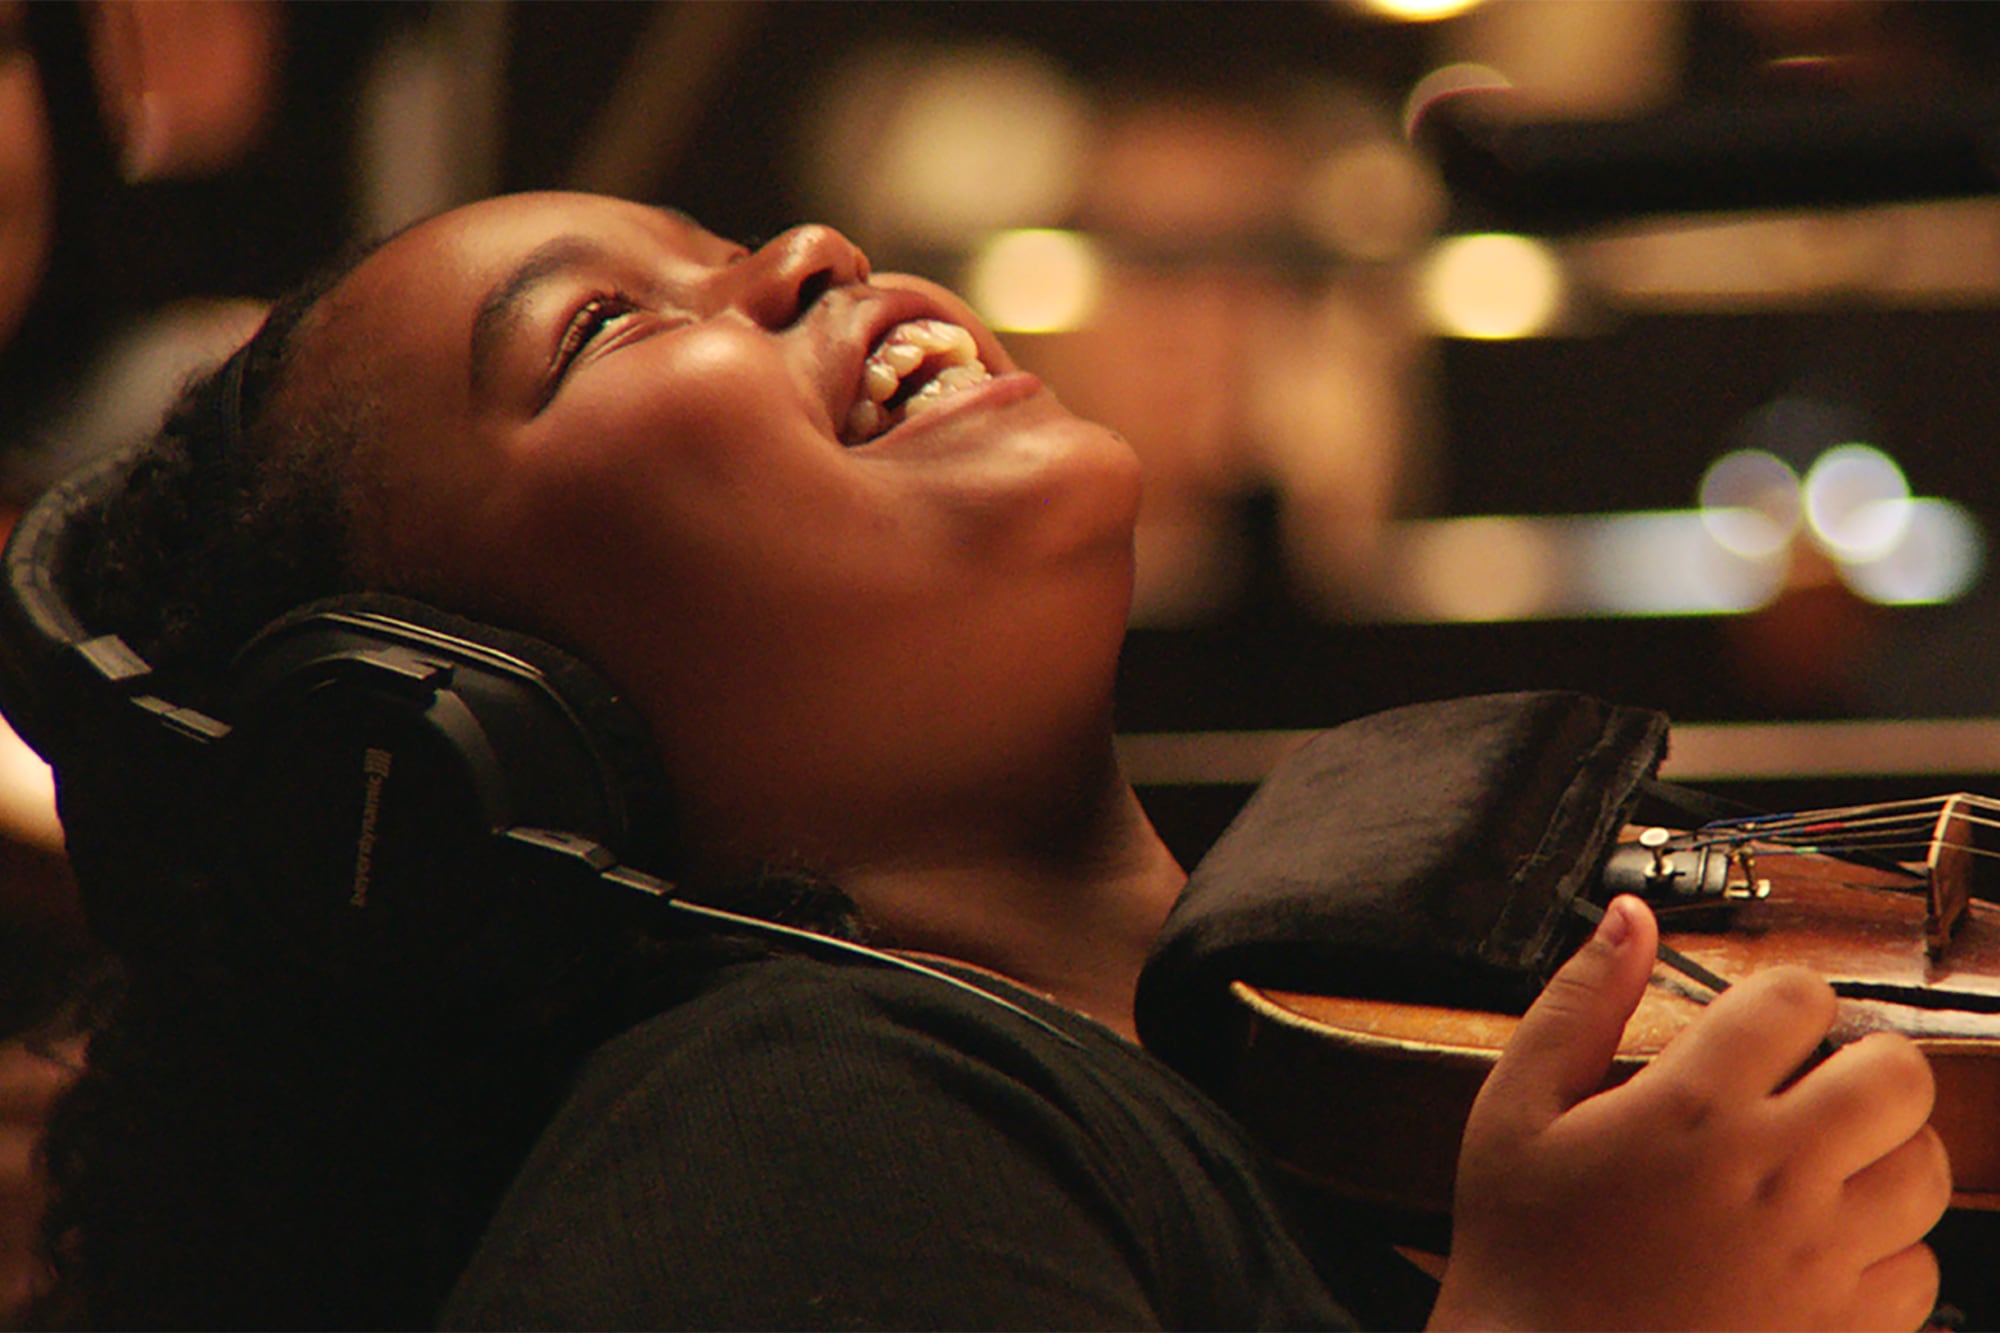 A young girl tilts her head back while she laughs and is holding a violin.